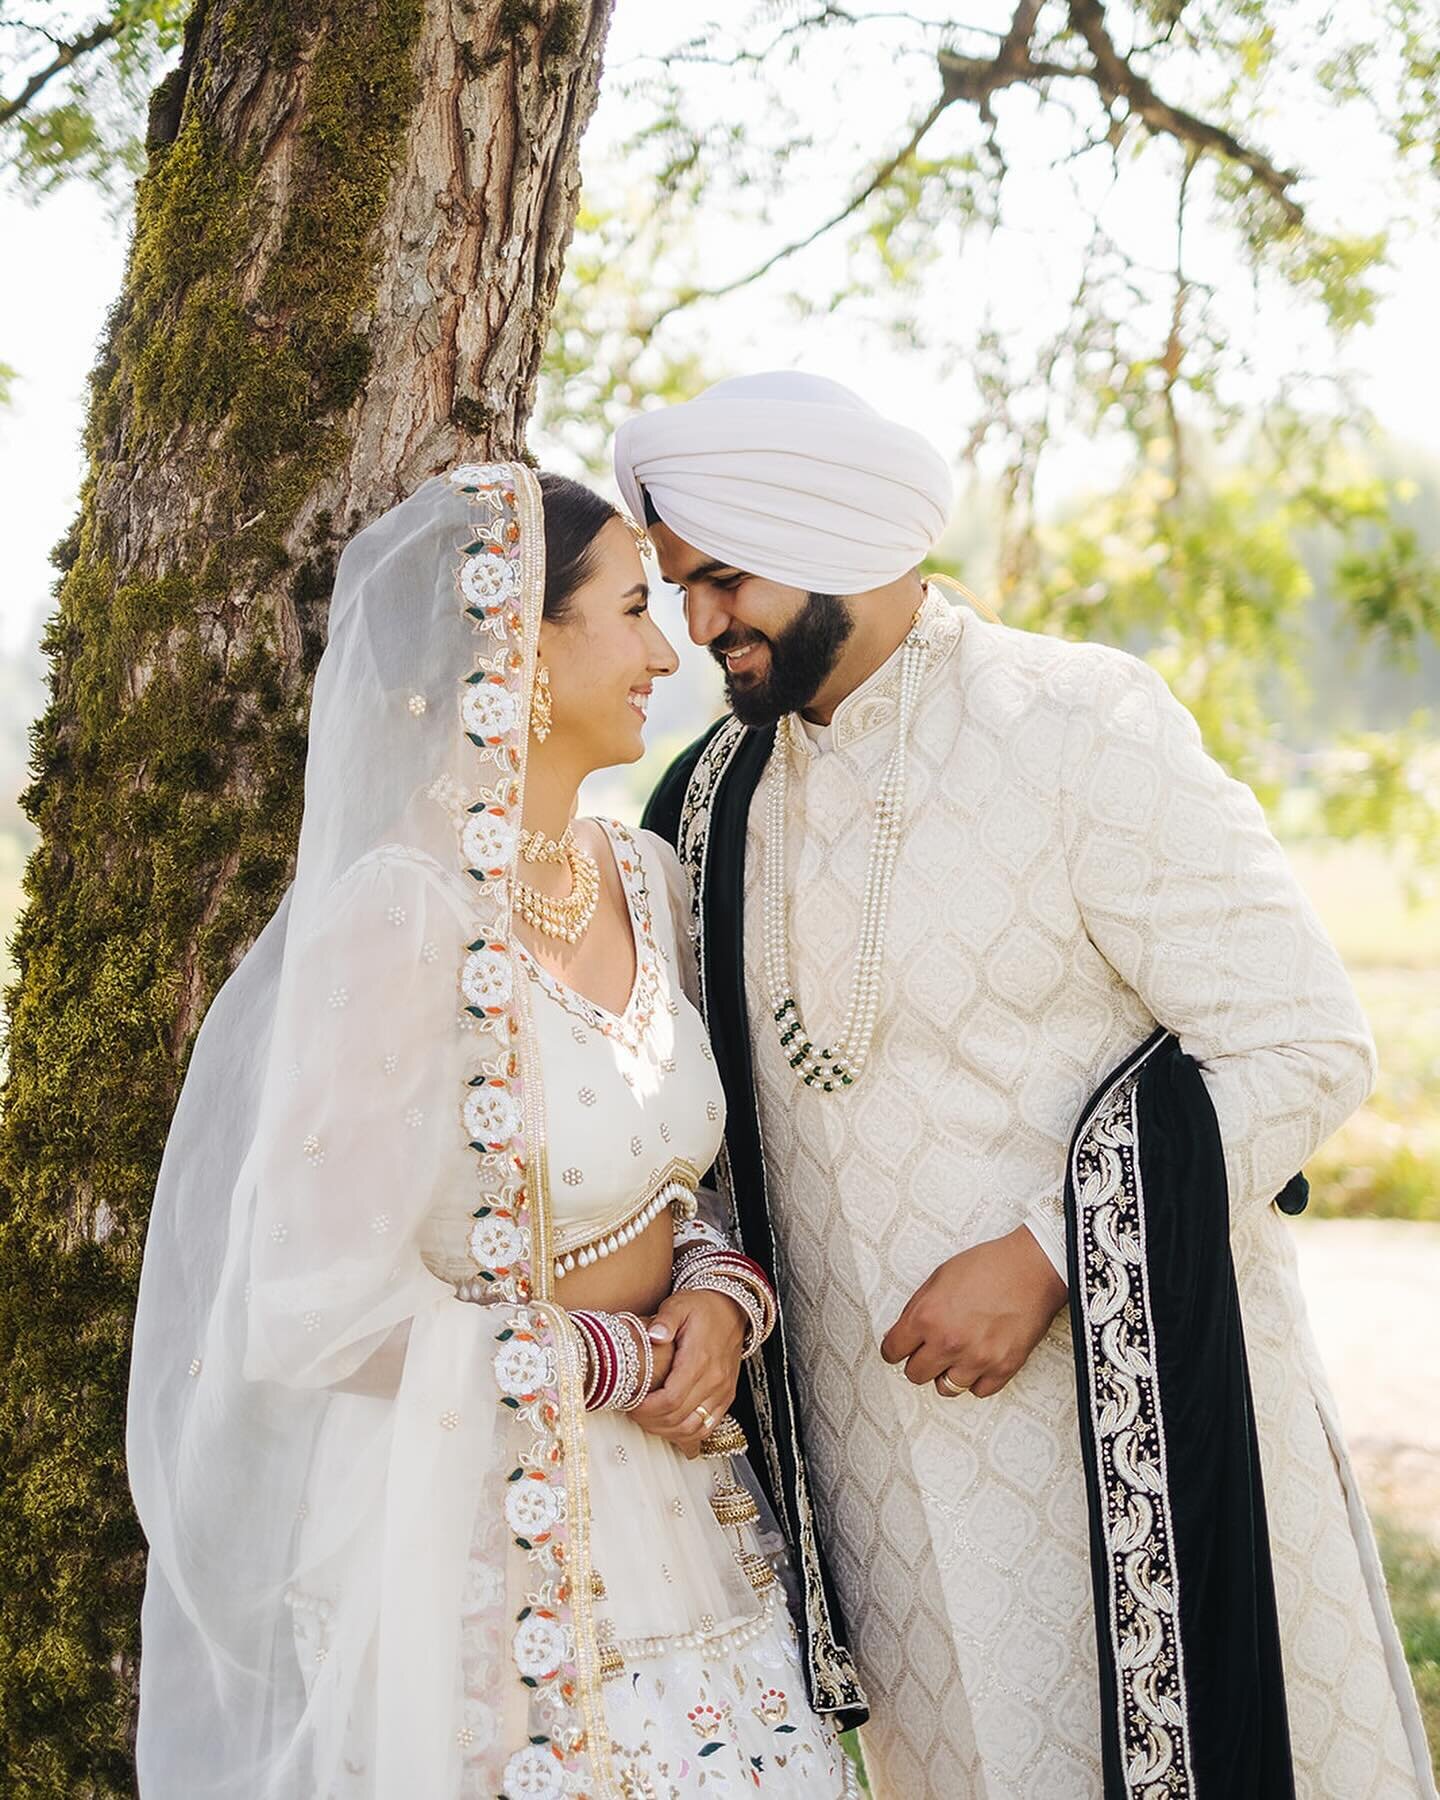 Our favorite moments from Raman and Amir&rsquo;s incredible day! ❤️❤️❤️⁣
⁣
⁣
⁣
⁣
#vancouverweddings #vancouverwedding #wedmegood #indianbride #surrey #weddingdress #bridalmakeup #bridaltrousseau #indianwedding #vancouverbride #surreywedding #bridal #